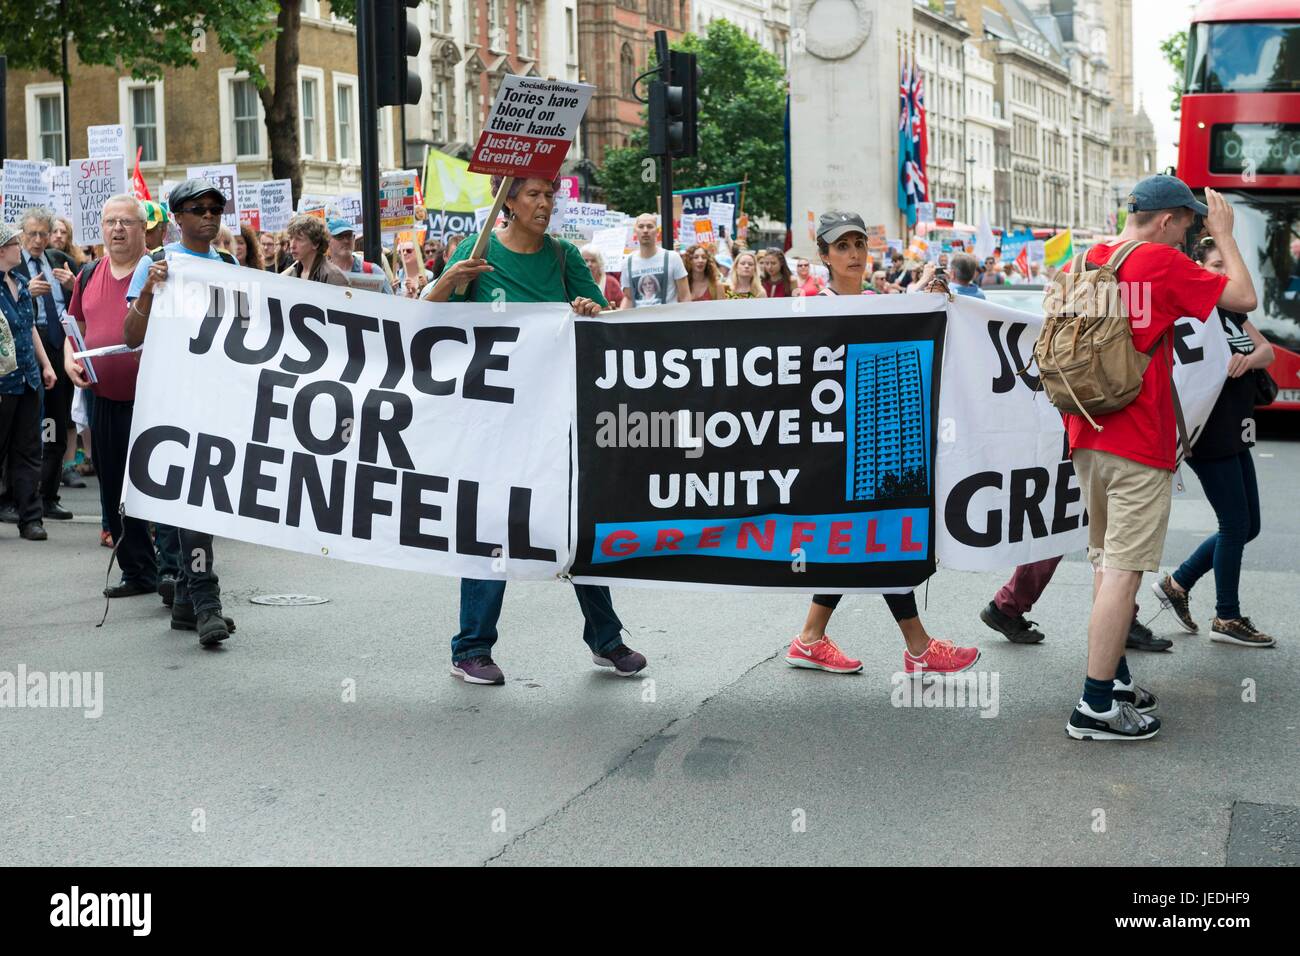 London, UK. 24th June, 2017. Justice for Grenfell at Downing Street, Protesters with a banners at March for homes. London, UK. 24/06/2017 Credit: dpa/Alamy Live News Stock Photo